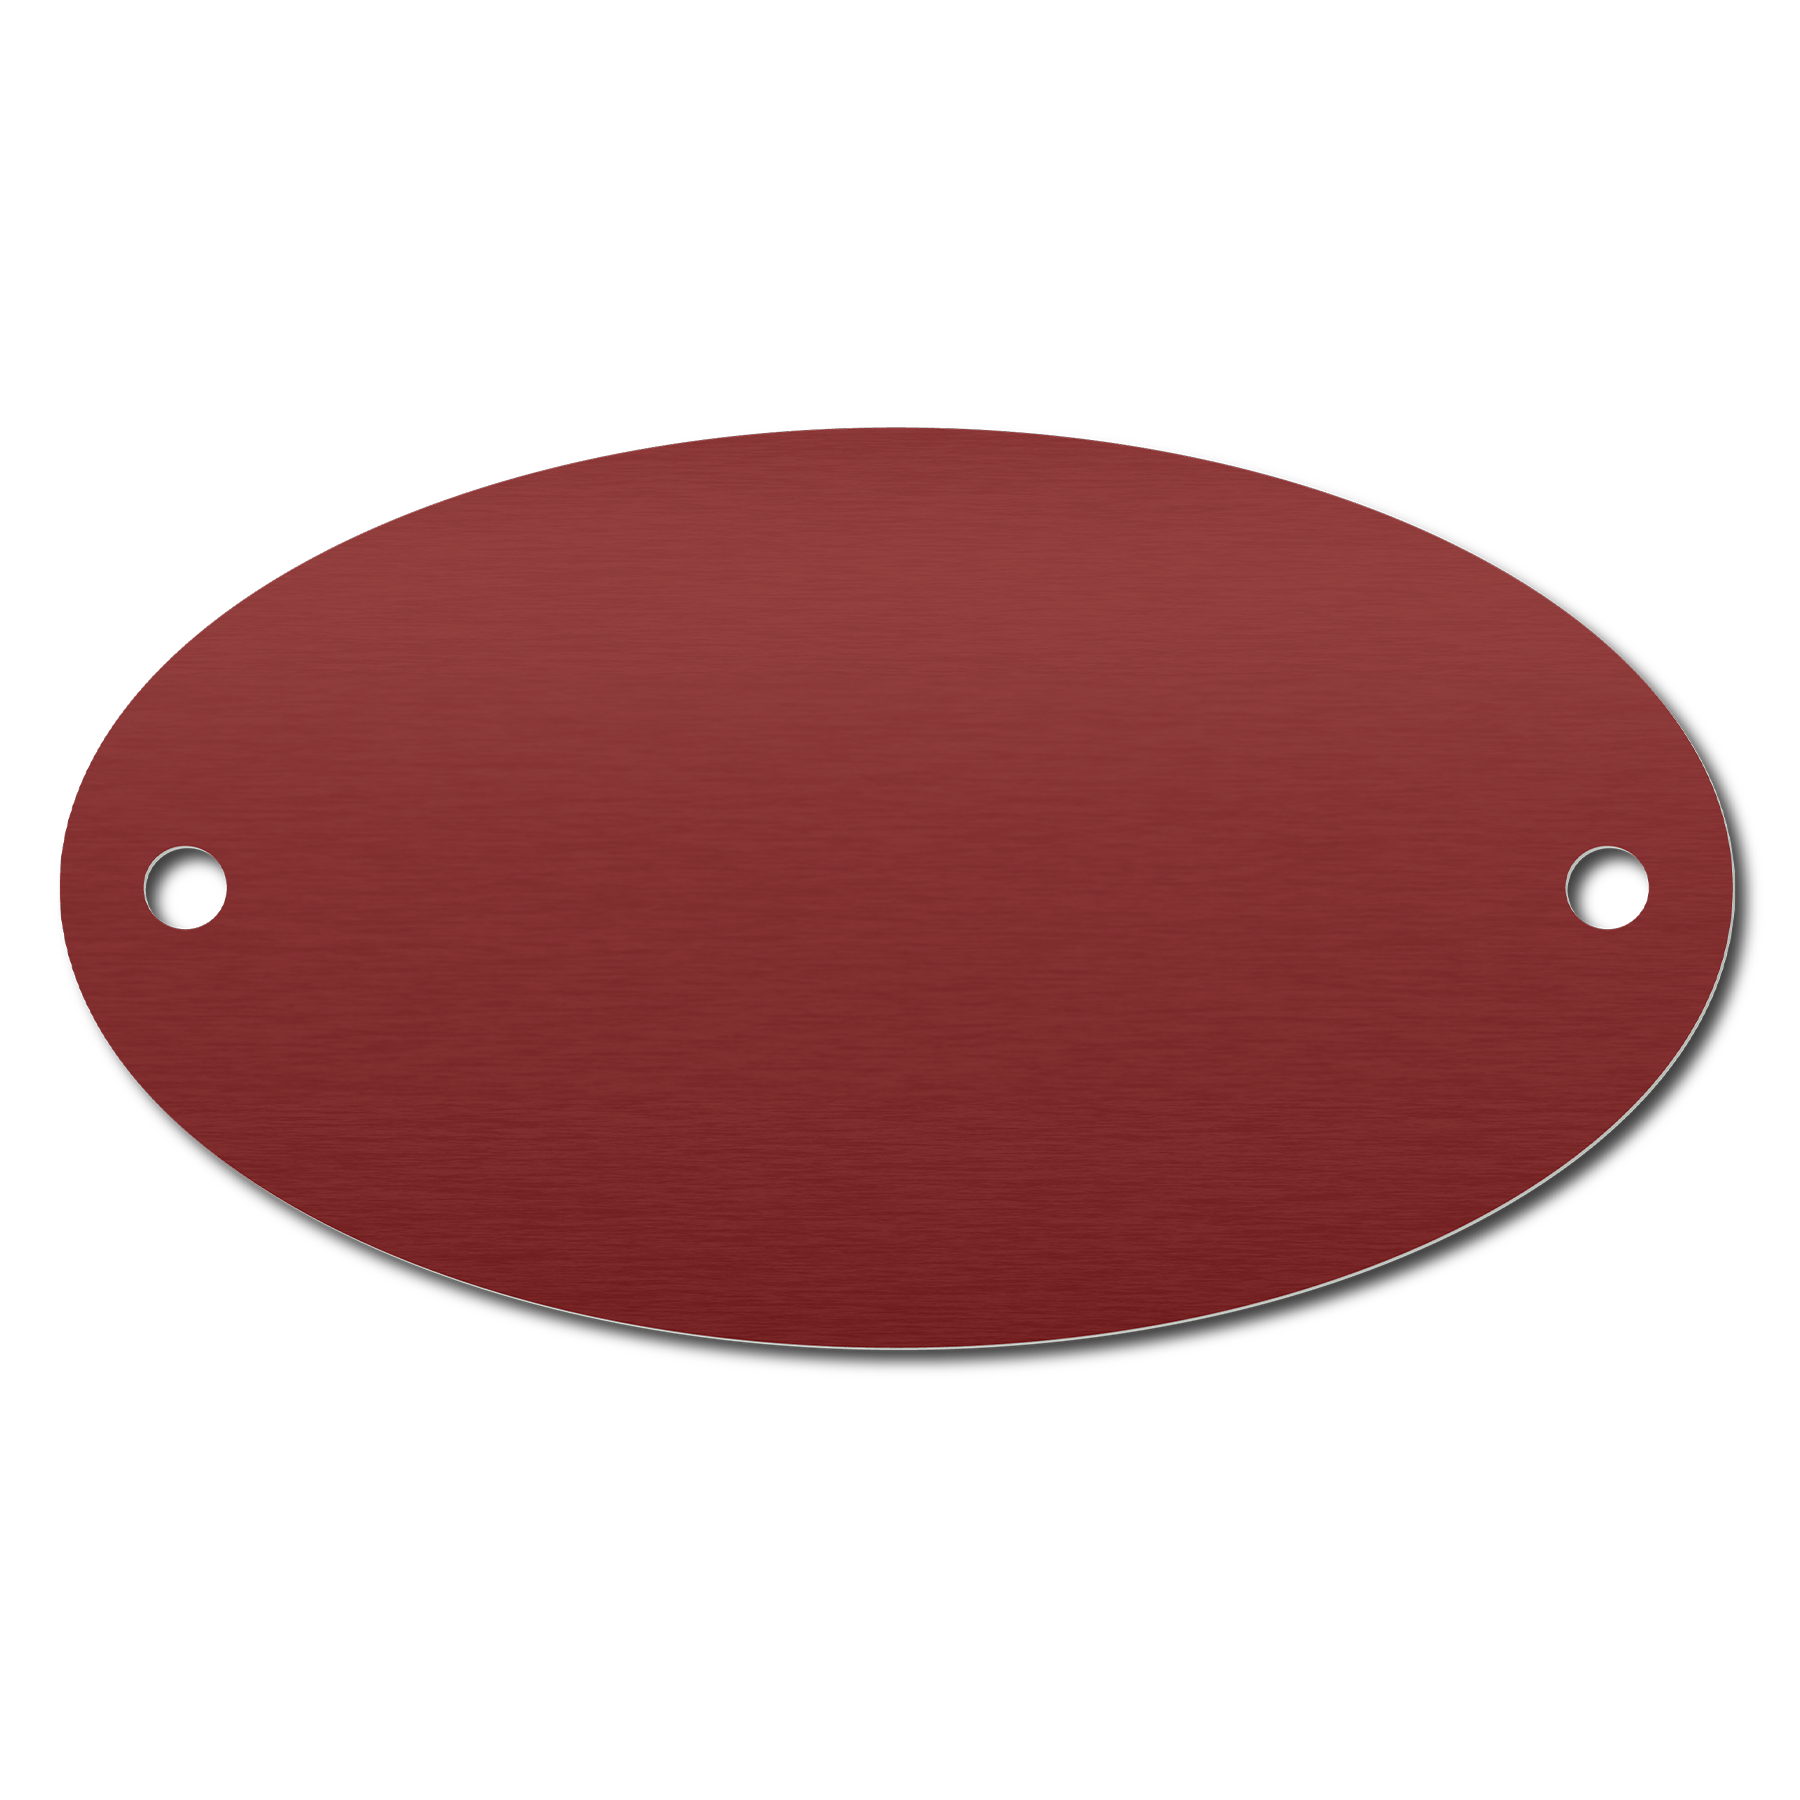 Anodized Aluminum Oval Tags, 1-3/8" x 2-1/2" with 1/8" Holes, Laser Engraved - Craftworks NW, LLC